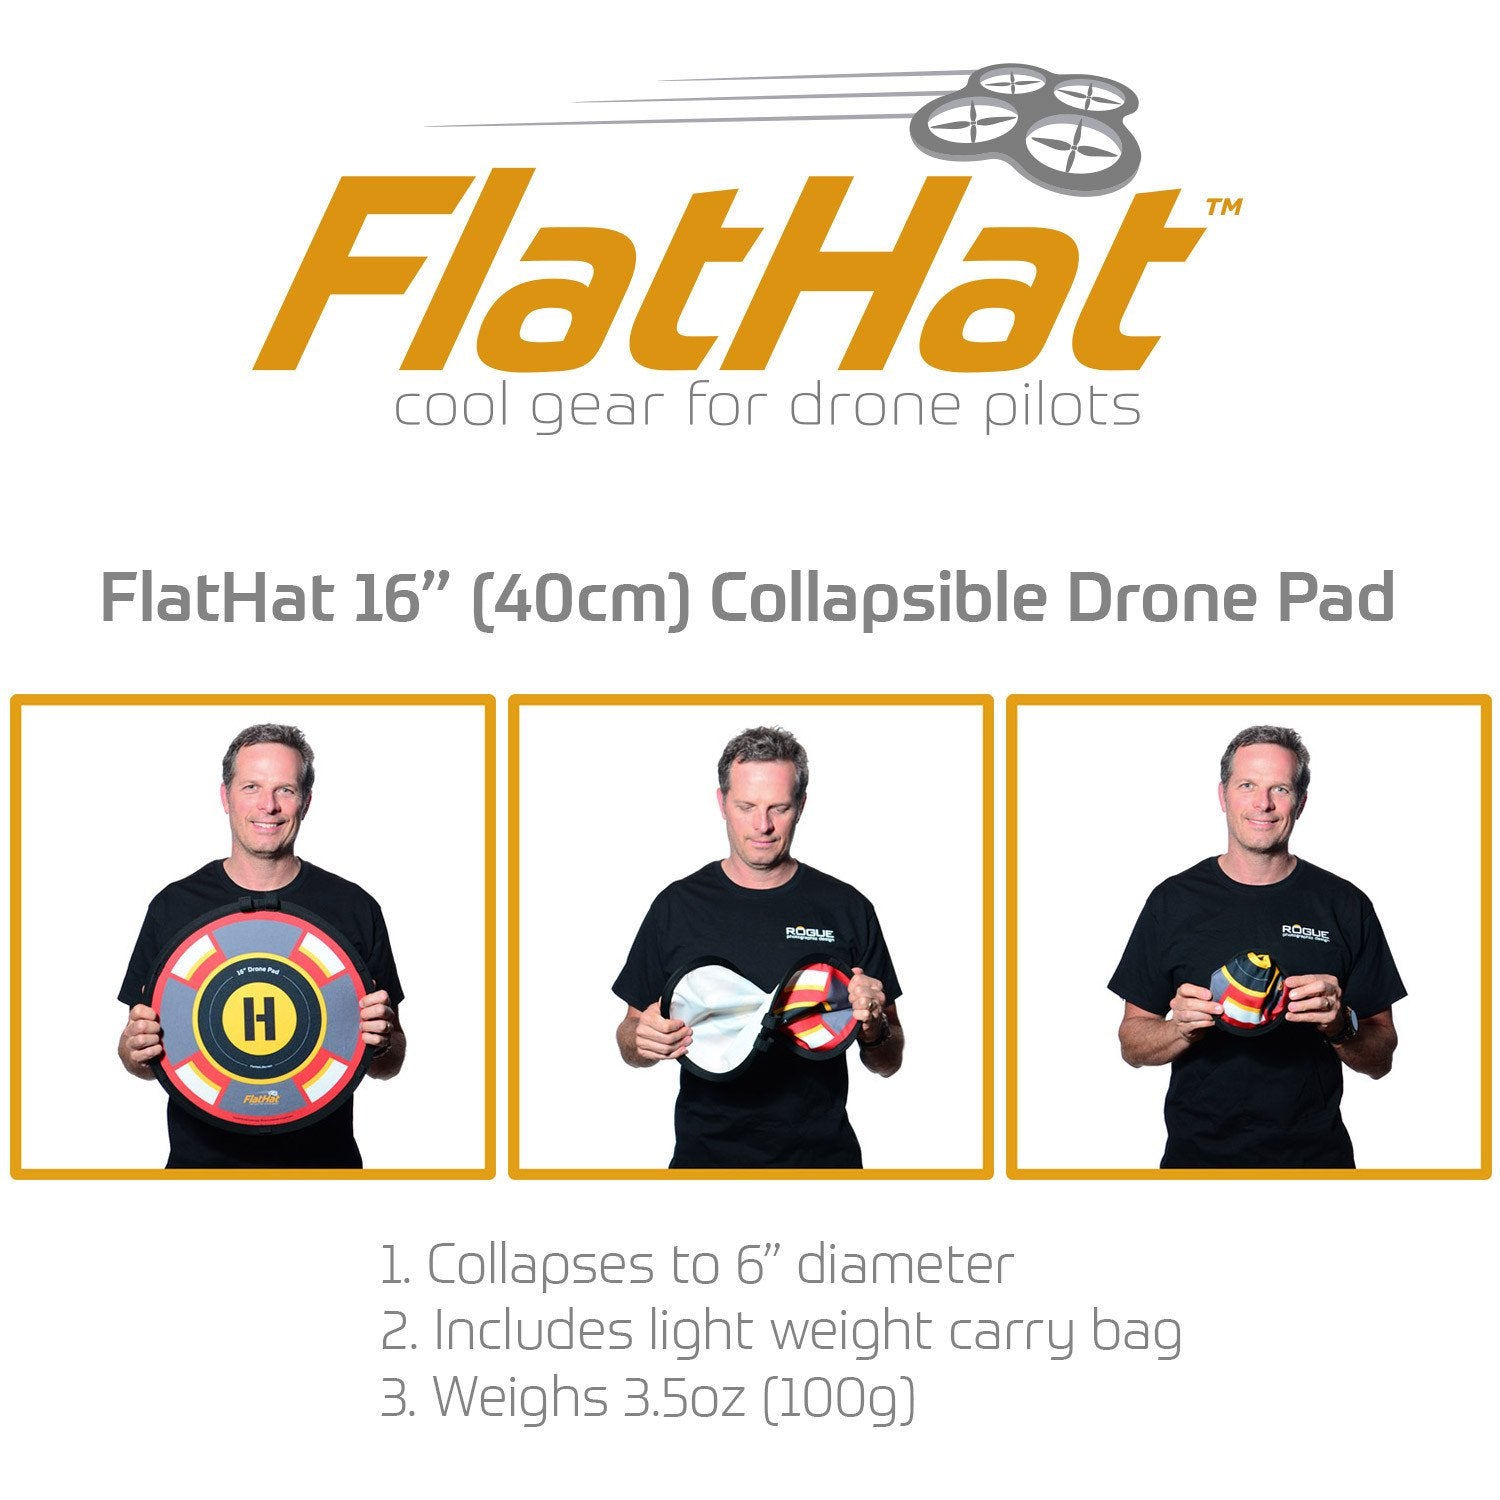 FlatHat 16" (40cm) Collapsible Drone Pad - Red Gold - Photo-Video - ExpoImaging - Helix Camera 